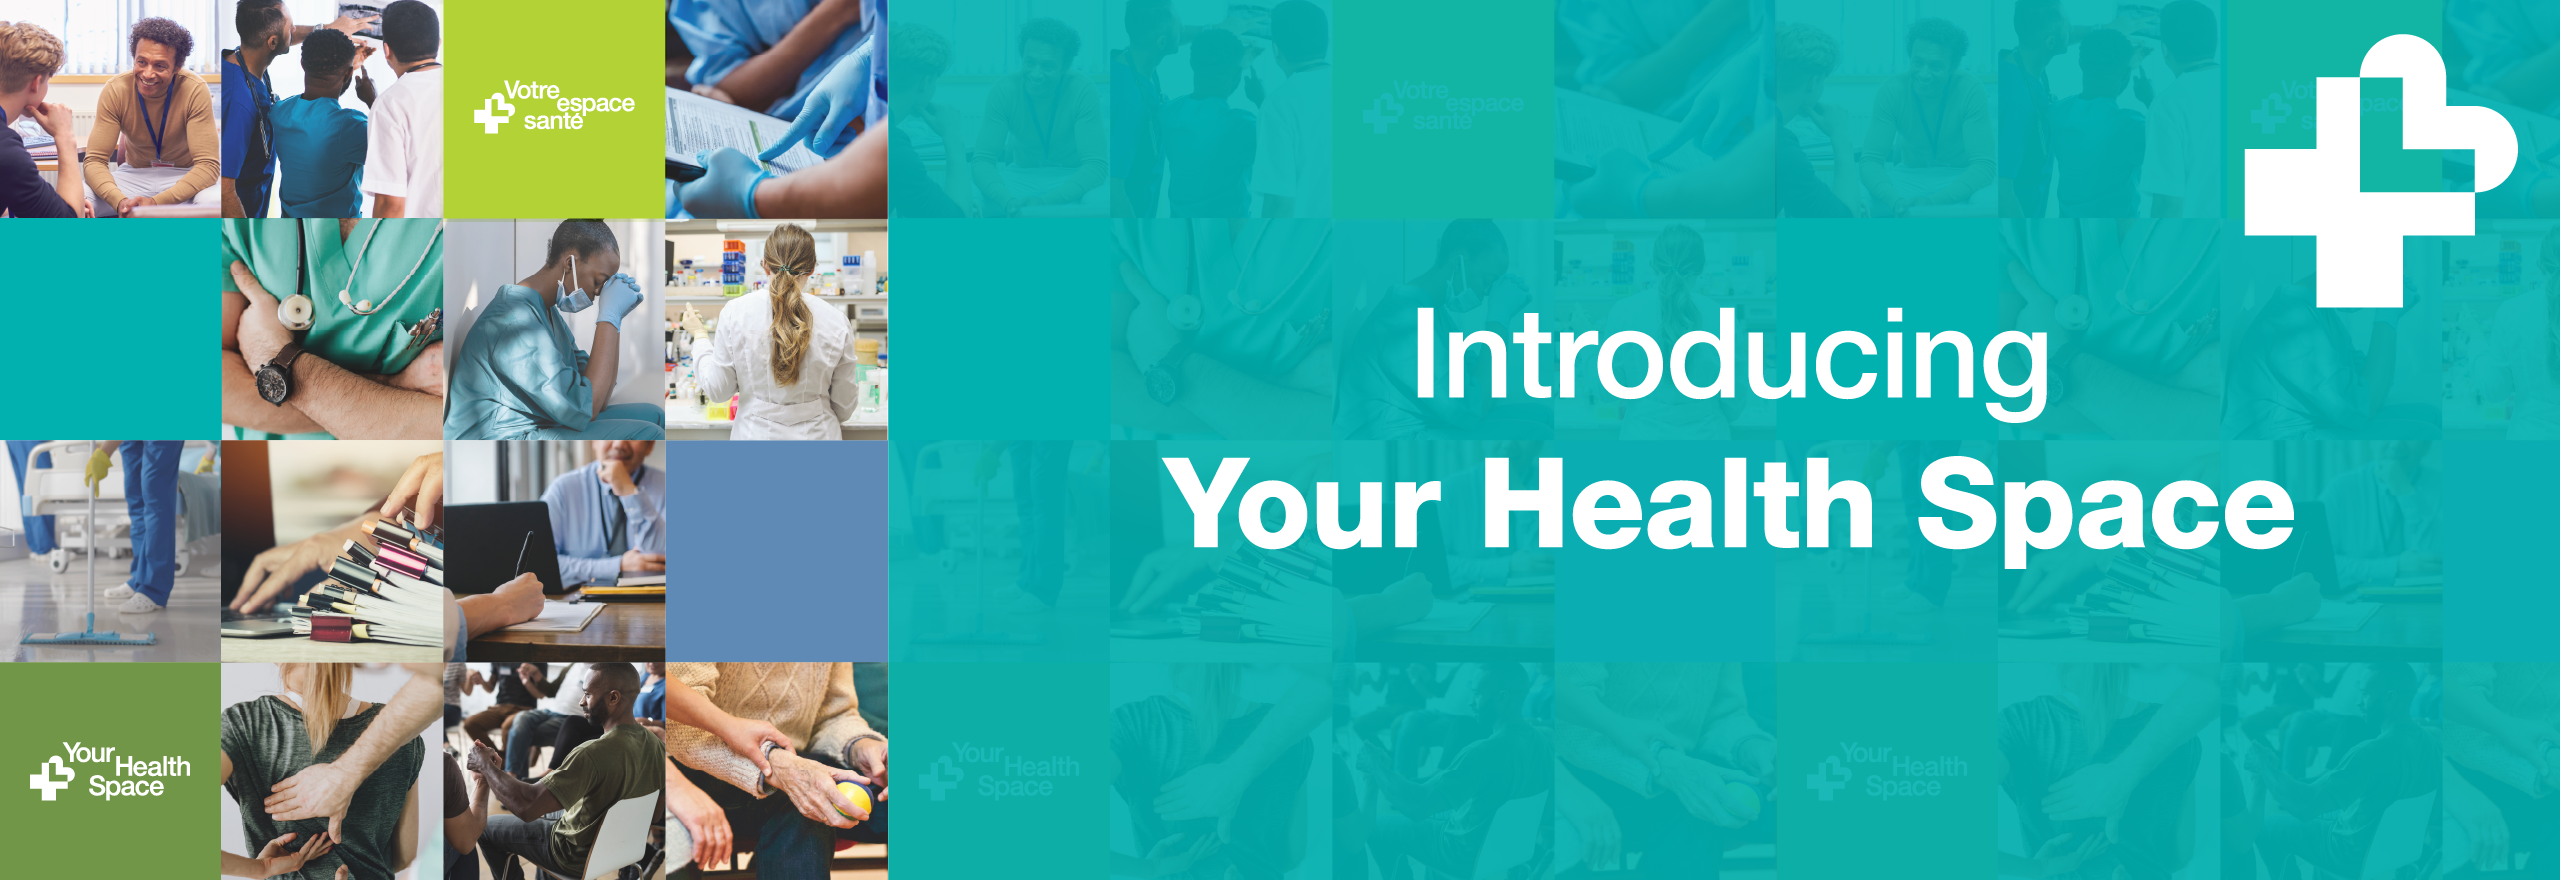 Introducing Your Health Space